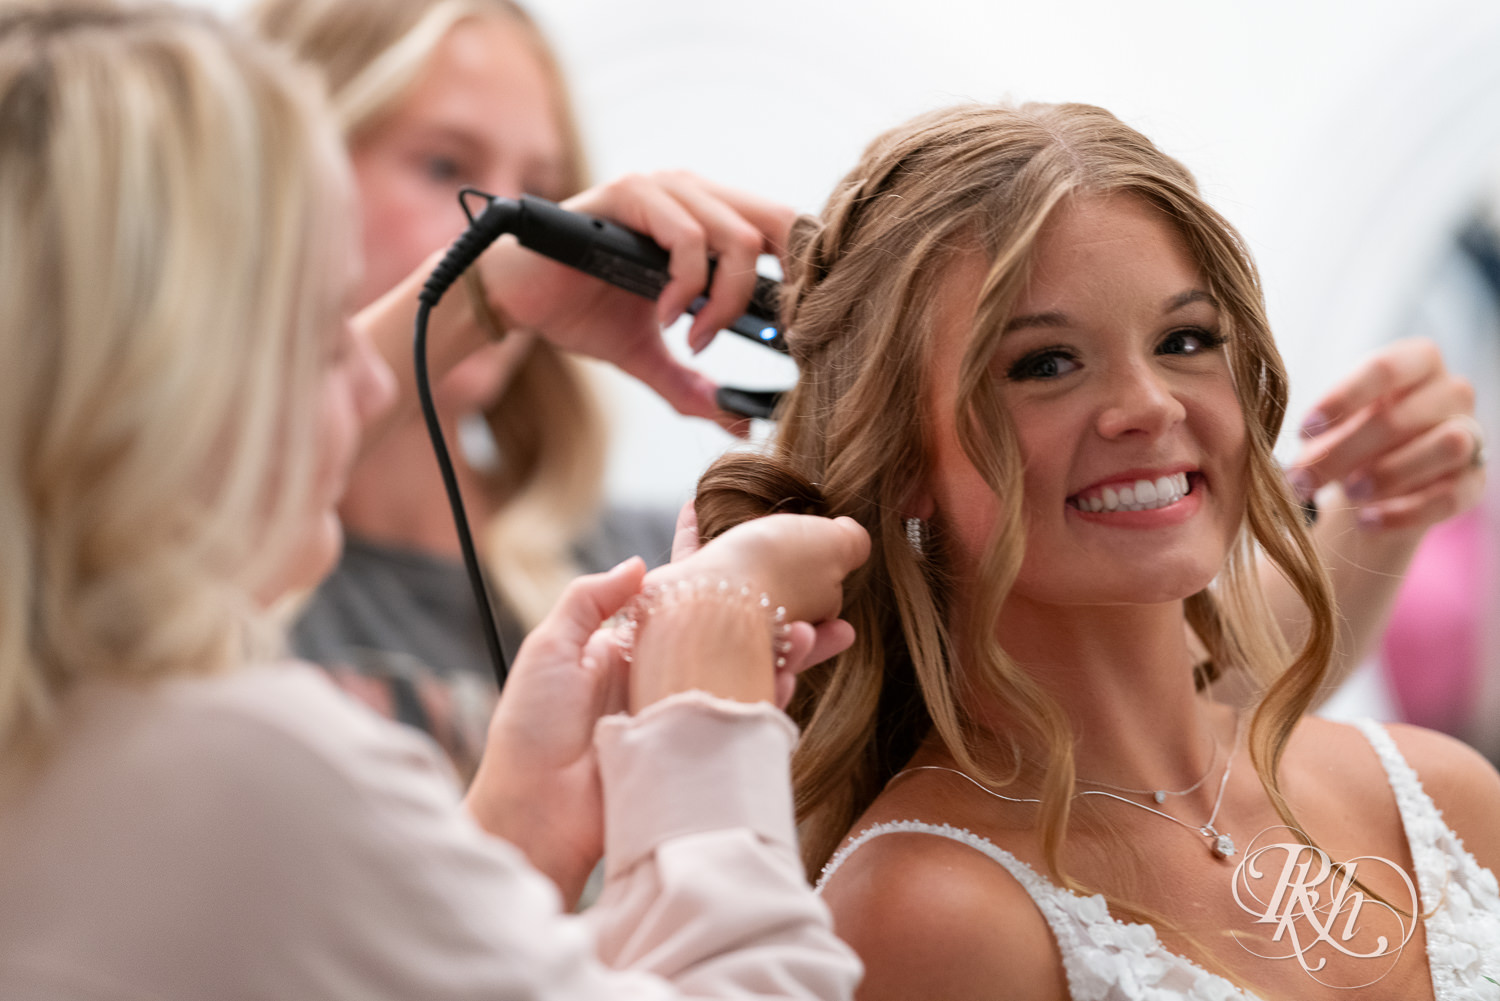 Bride smiling while getting hair curled on wedding day at Ahavah Cottage in Elysian, Minnesota.